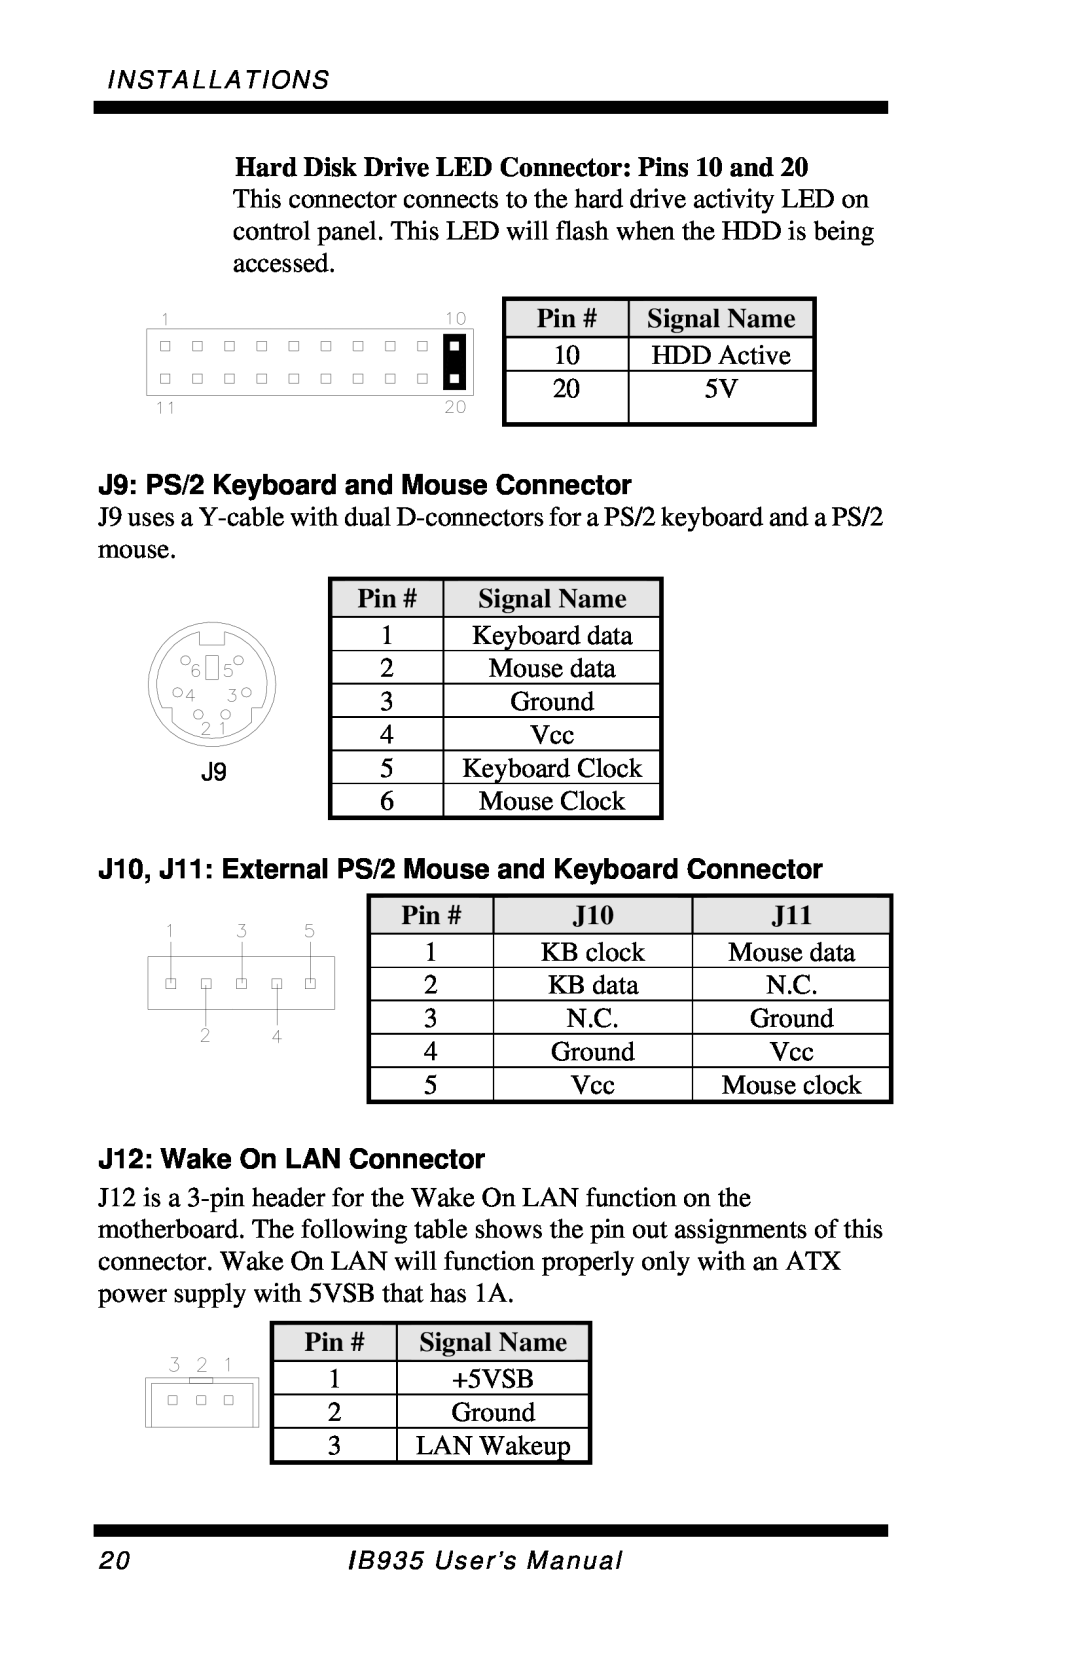 Intel IB935 user manual J9 PS/2 Keyboard and Mouse Connector, J10, J11 External PS/2 Mouse and Keyboard Connector 